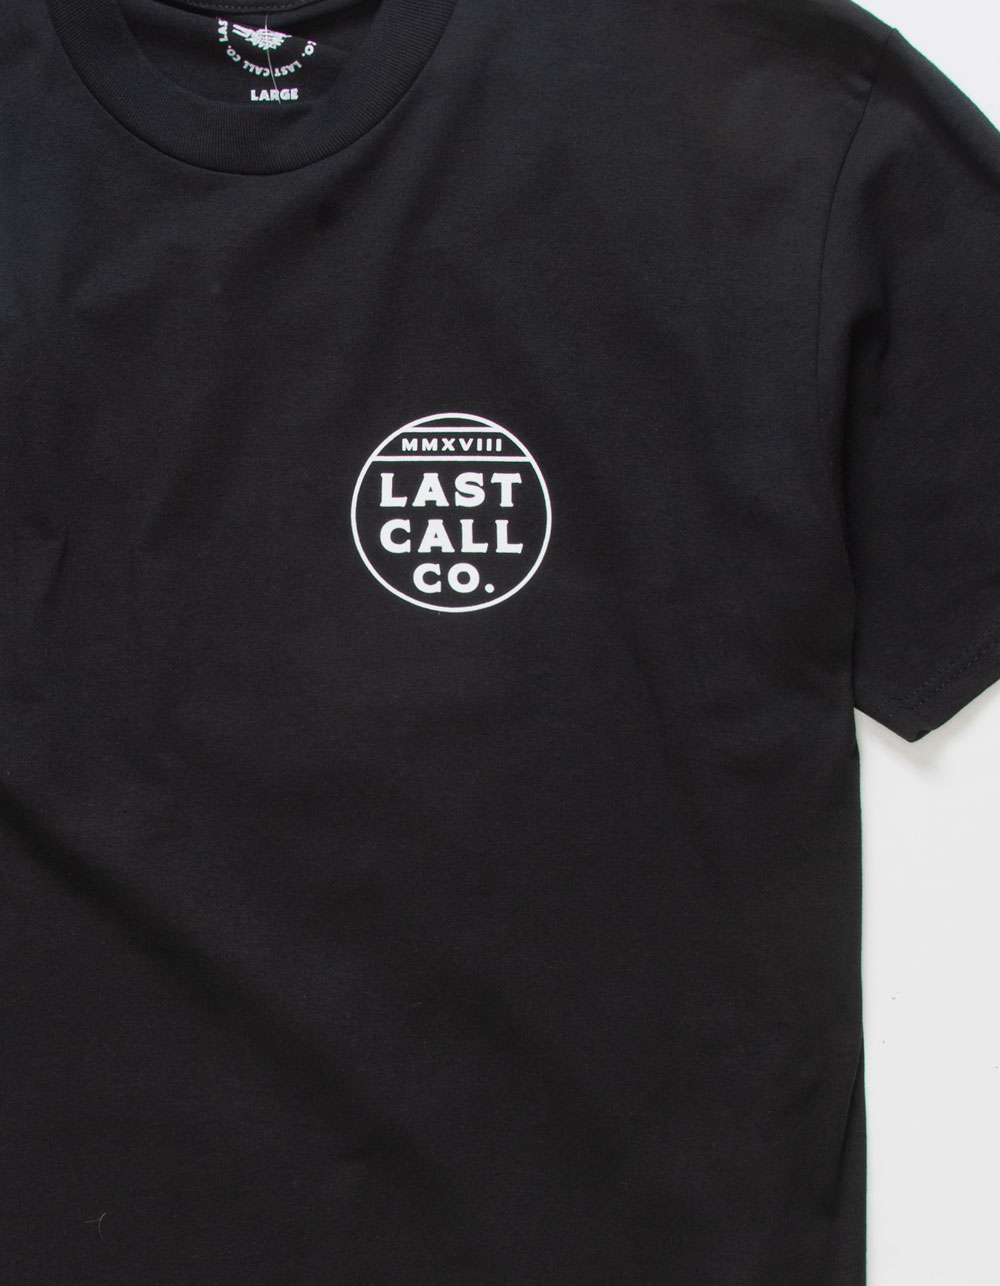 LAST CALL CO. Played Yourself Mens Tee - BLACK